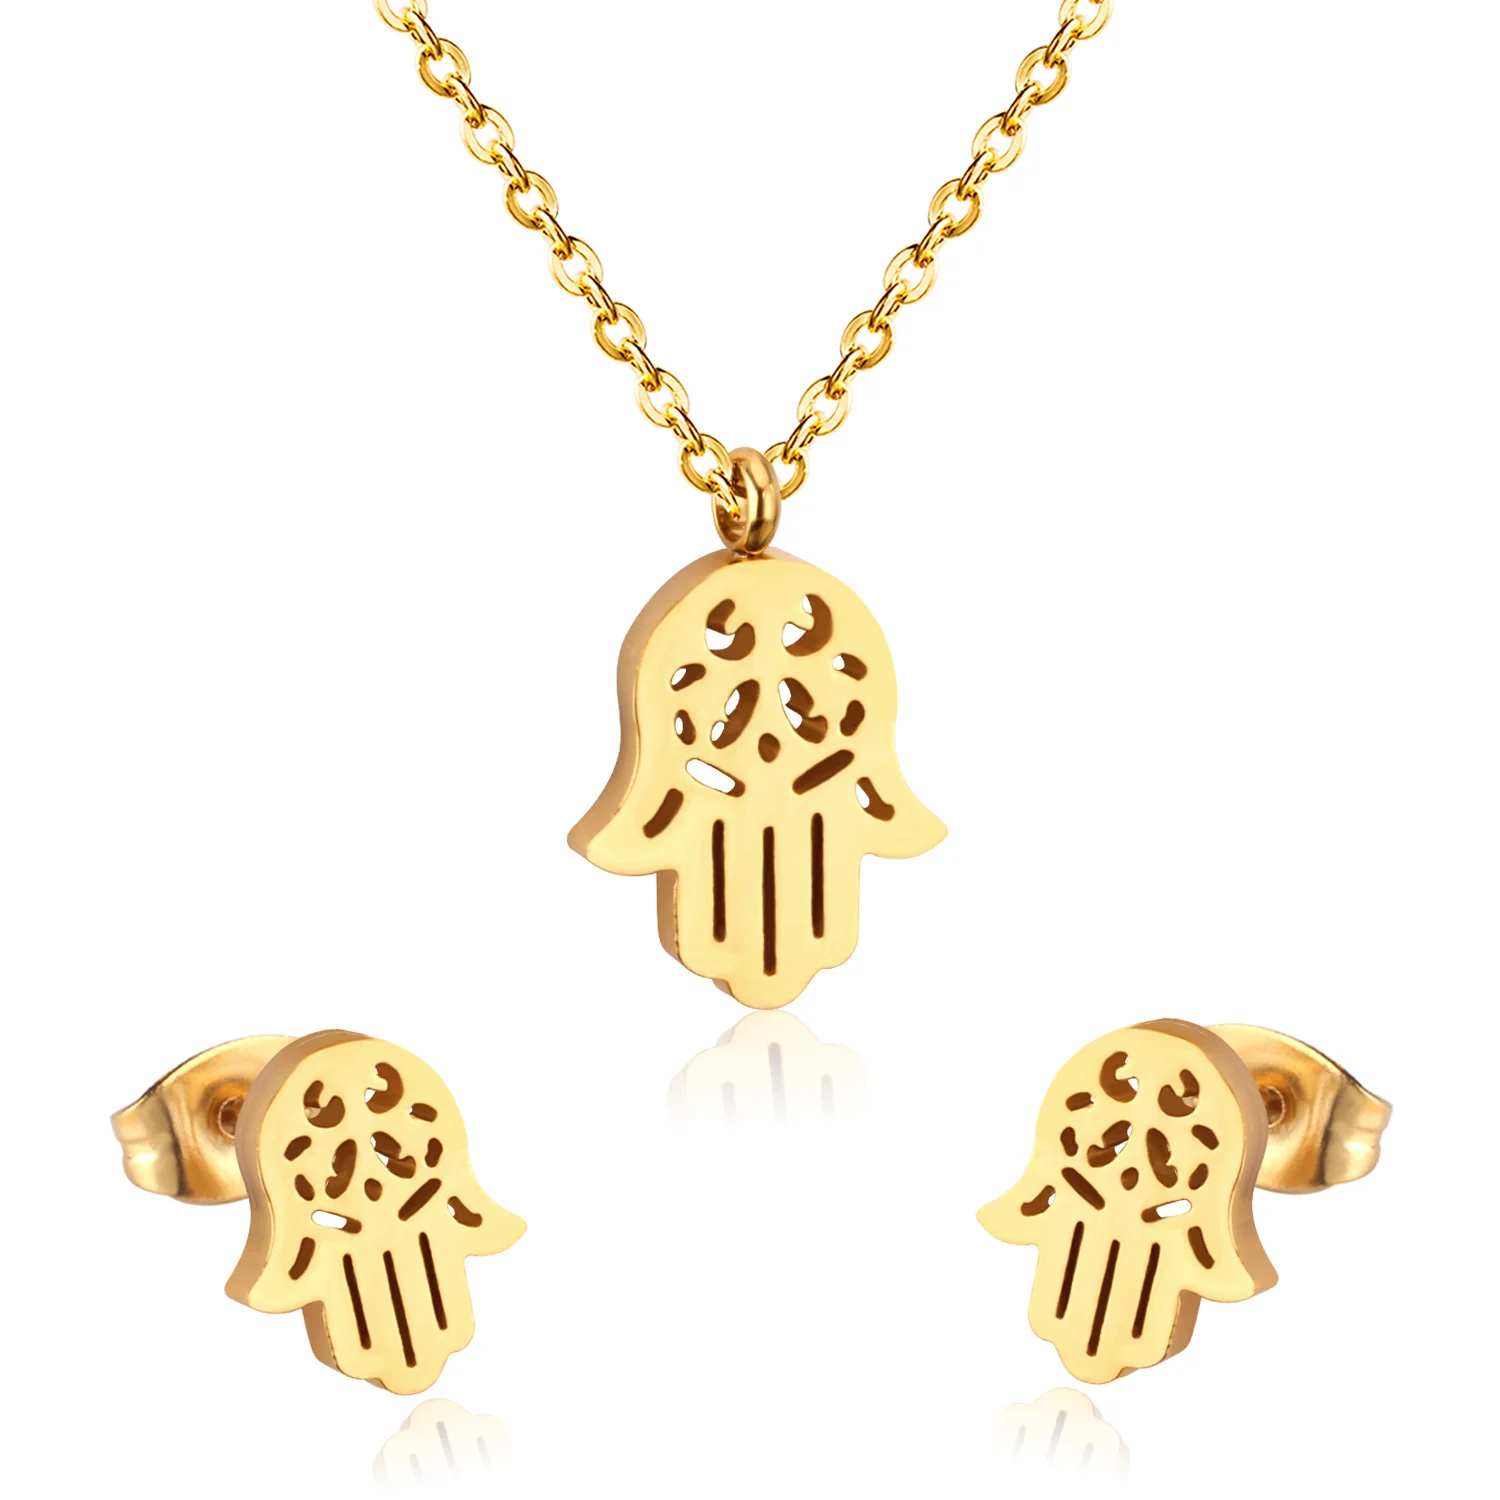 LUXUKISSKIDS Animal Cat Jewelry Sets Stainless Steel 316L Hamsa Hand Necklace For Women/Girls Dubai Indian African Jewelry Sets 